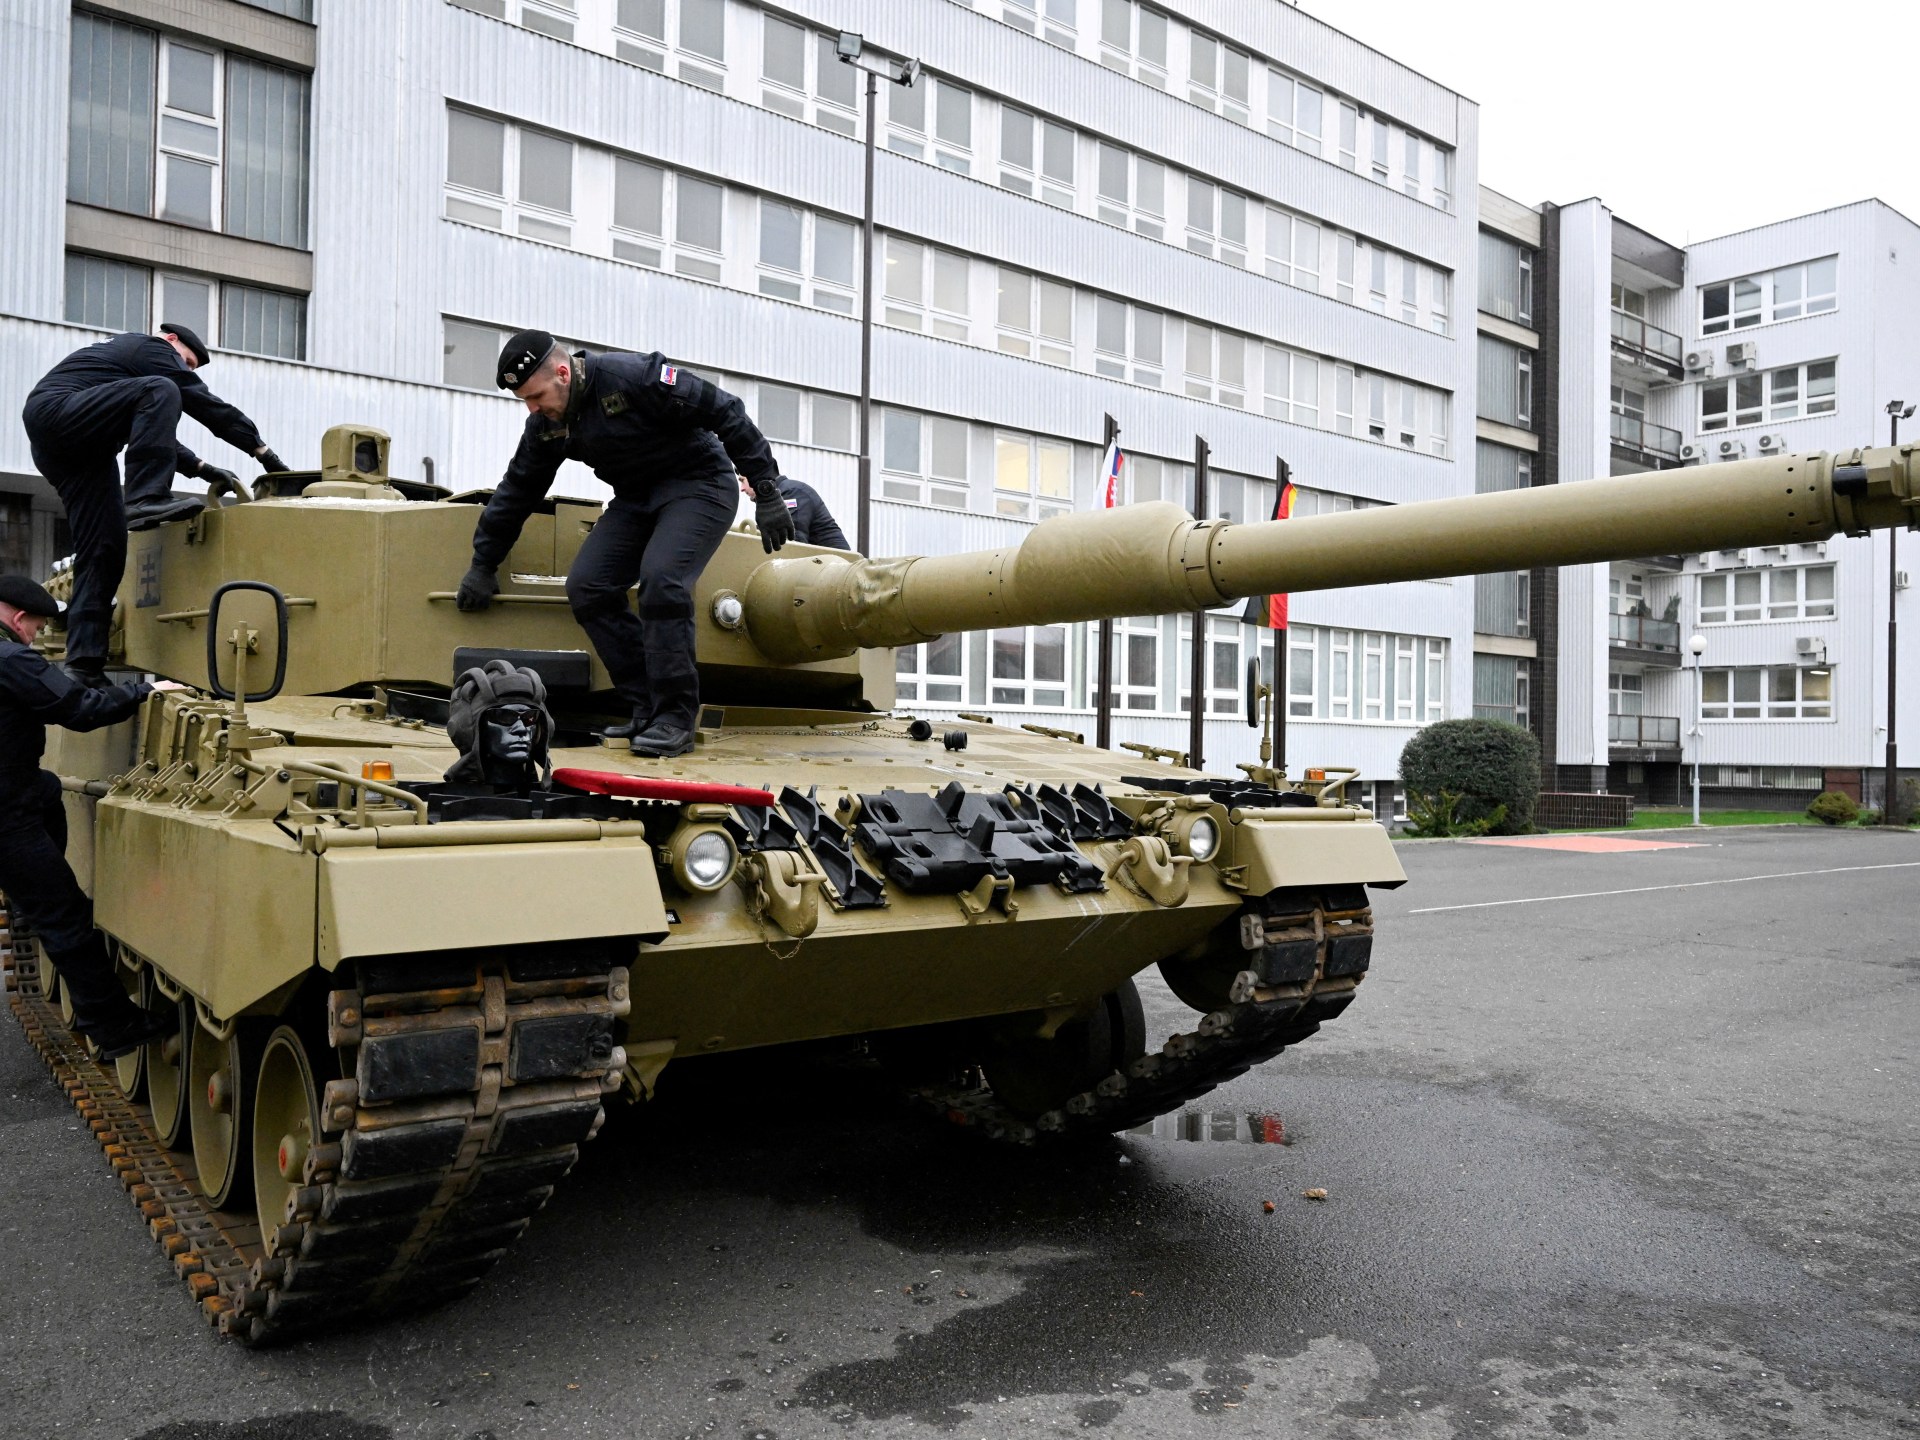 Will the West ship the tanks Ukraine is asking for?